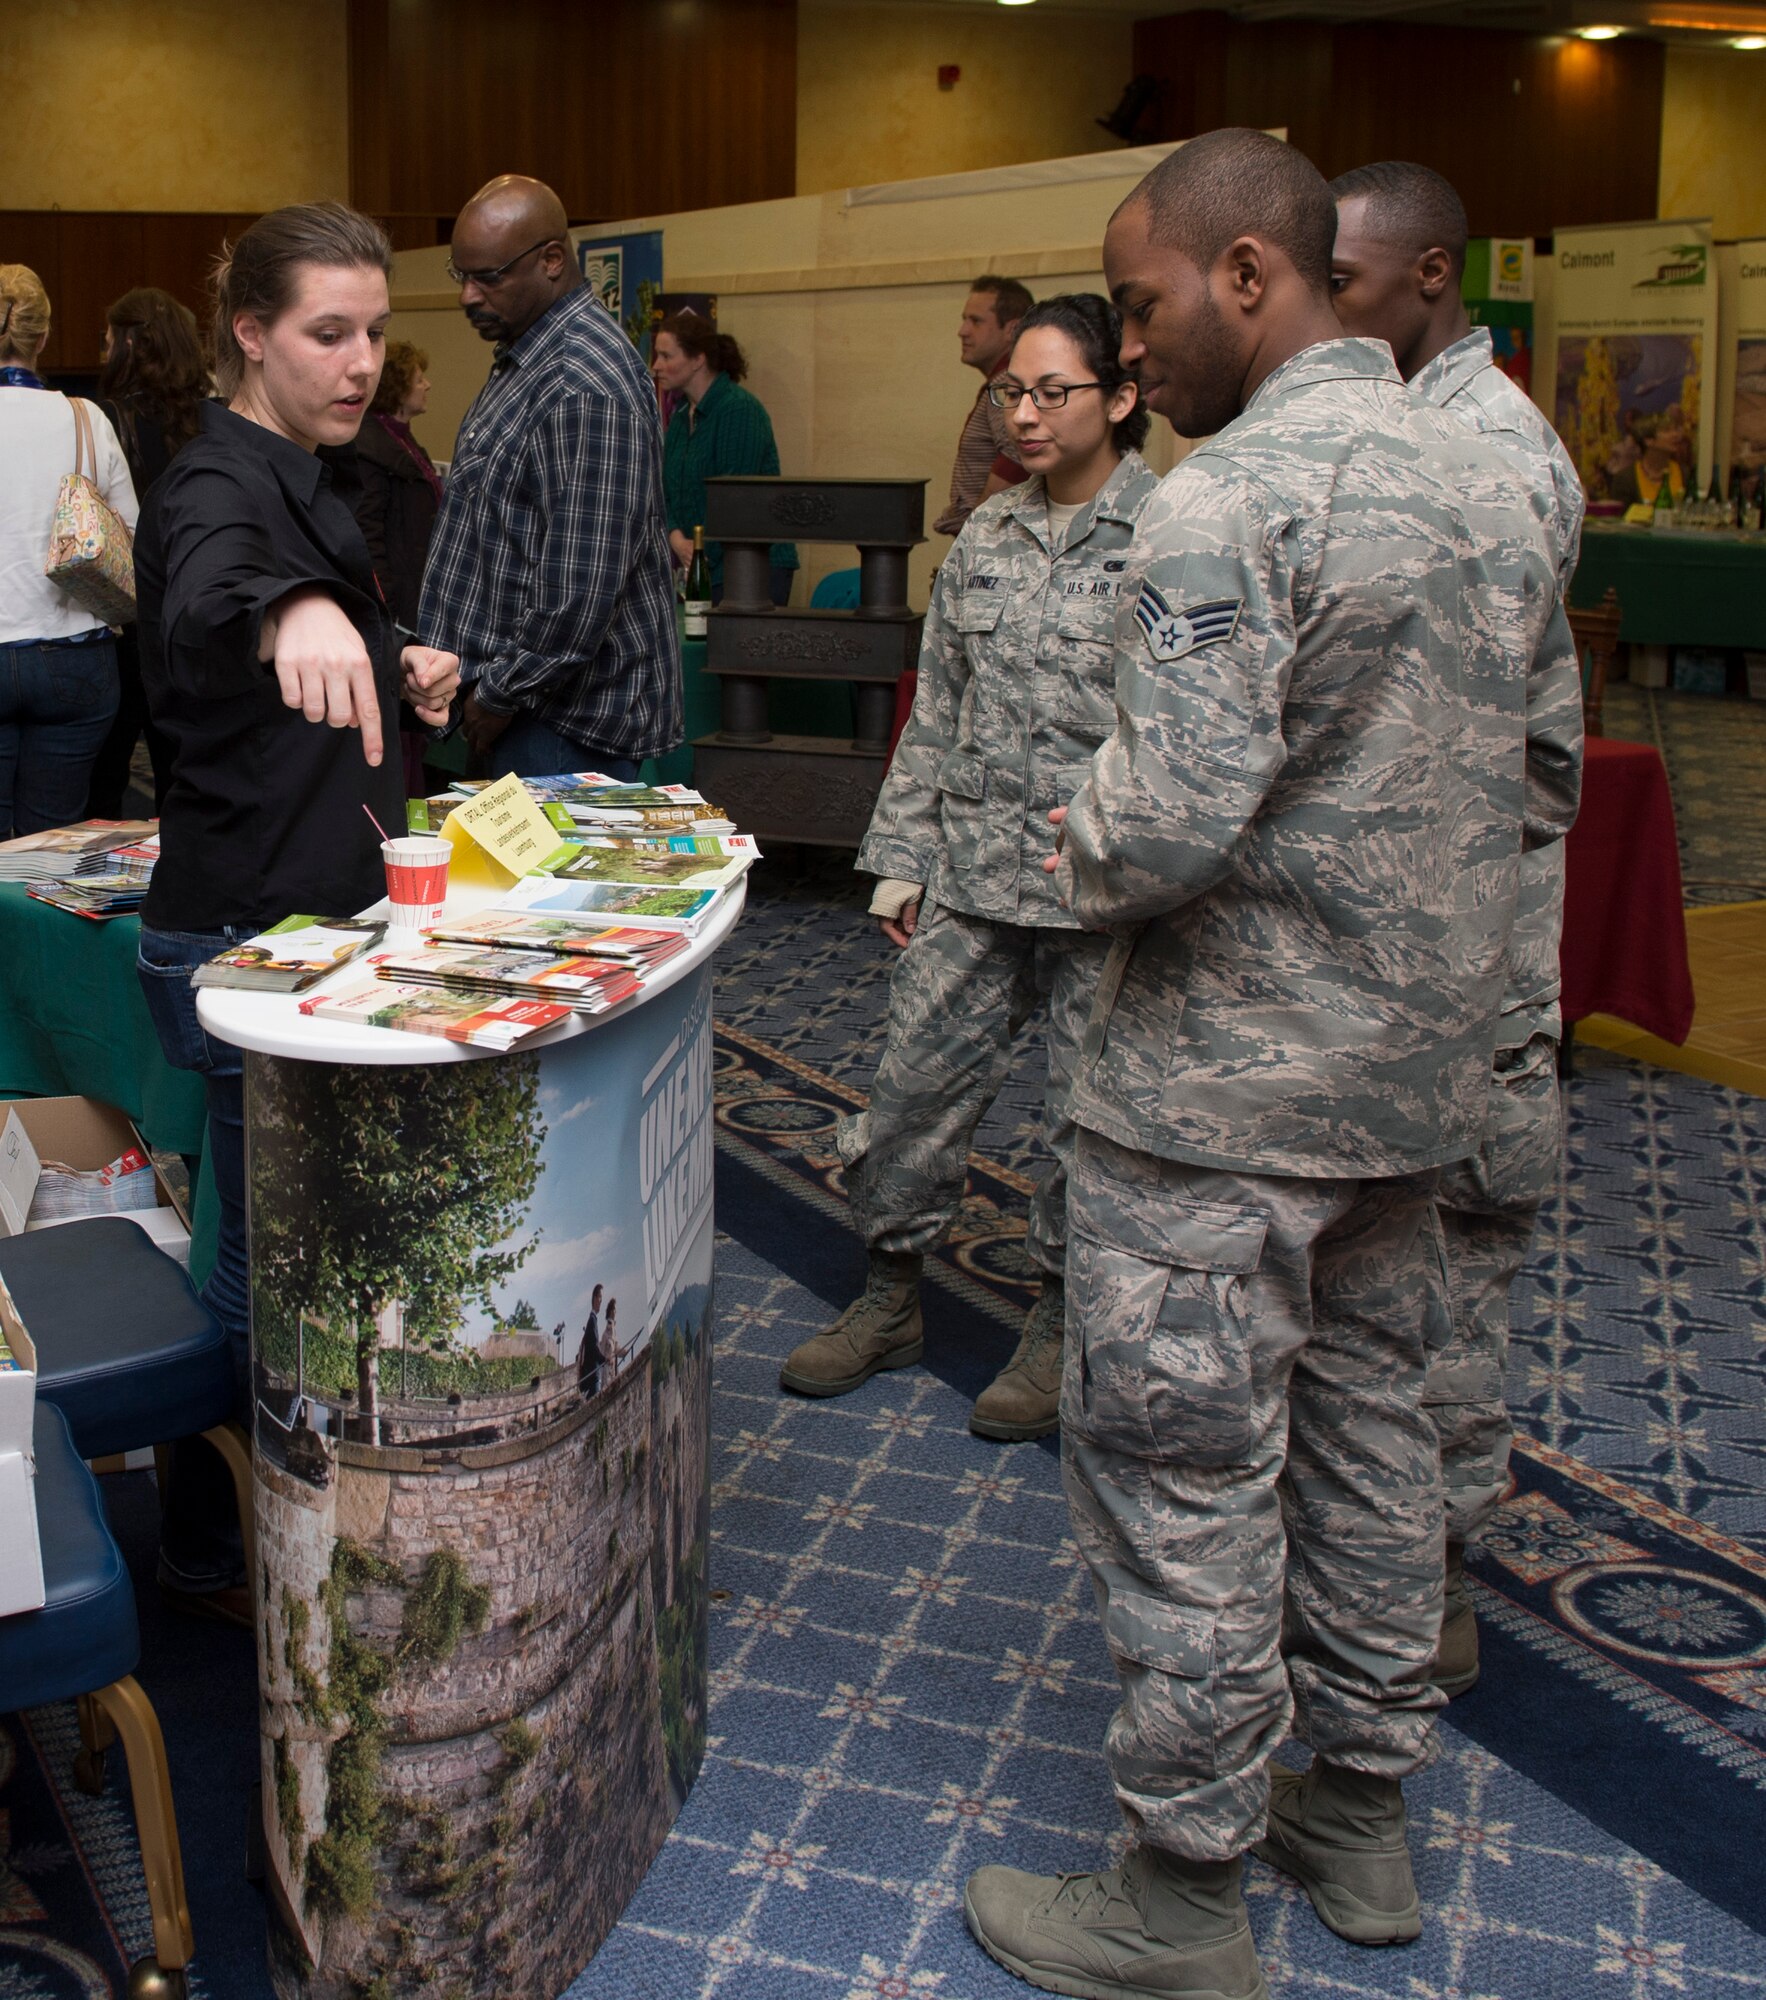 SPANGDAHLEM AIR BASE, Germany -- Stephanie Empain, Explore the Eifel vendor, tells Spangdahlem Airmen April 19, 2013, about unique opportunities in Luxembourg such as hiking. Explore the Eifel is an information fair that provides community members the opportunity to explore recreational activities the surrounding areas have to offer. (U.S. Air Force photo by Senior Airman Natasha Stannard/Released)